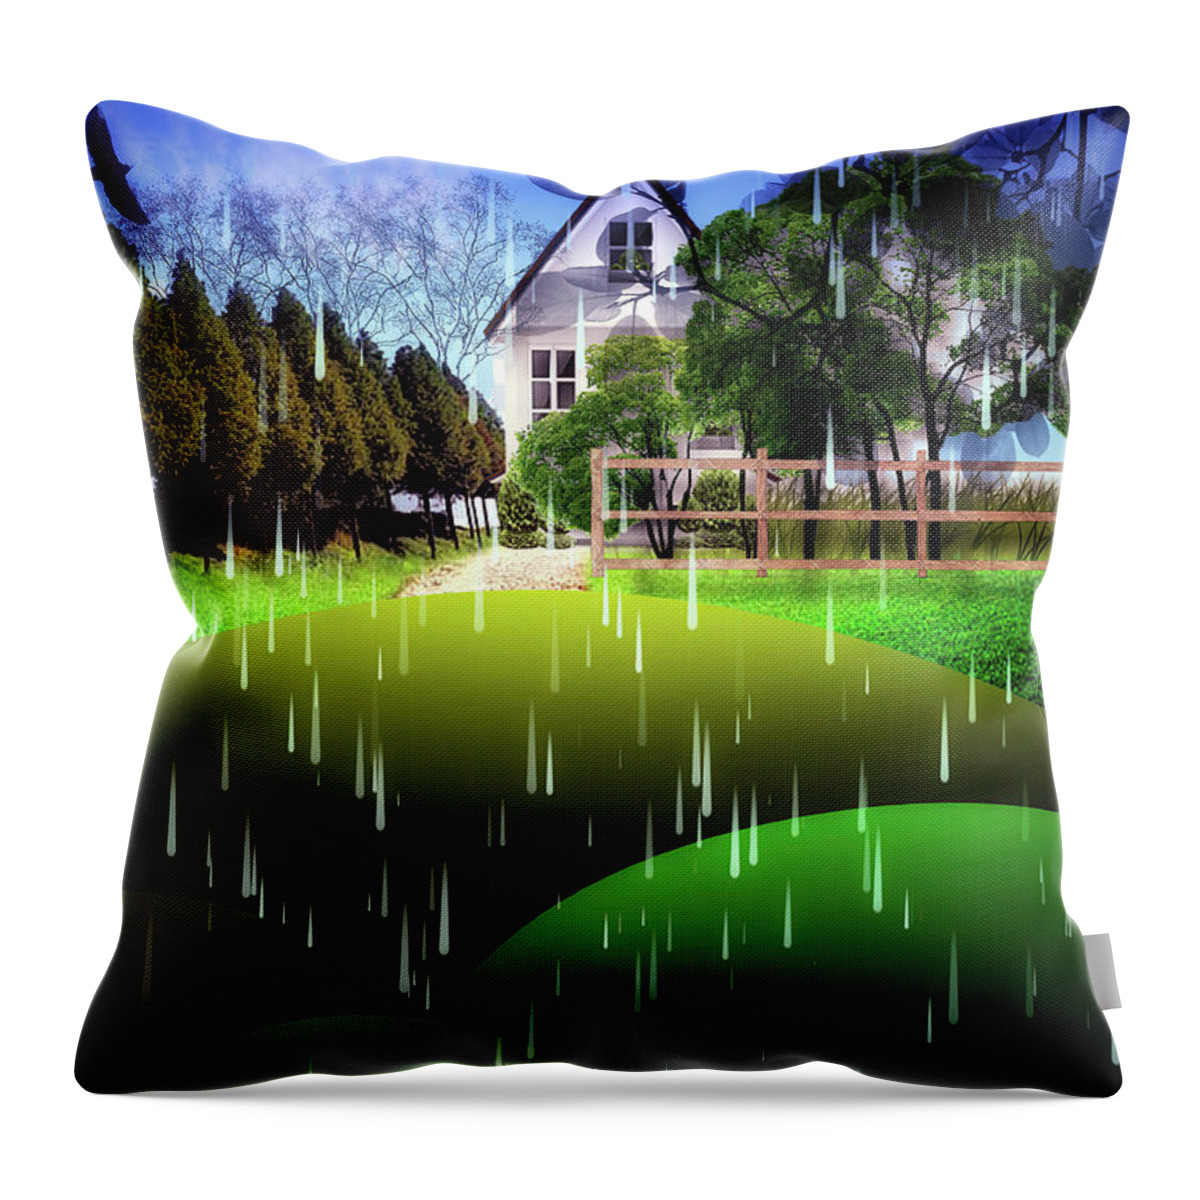 Folk Art Throw Pillow featuring the photograph Top Of The Hill In The Rain by Jack Torcello